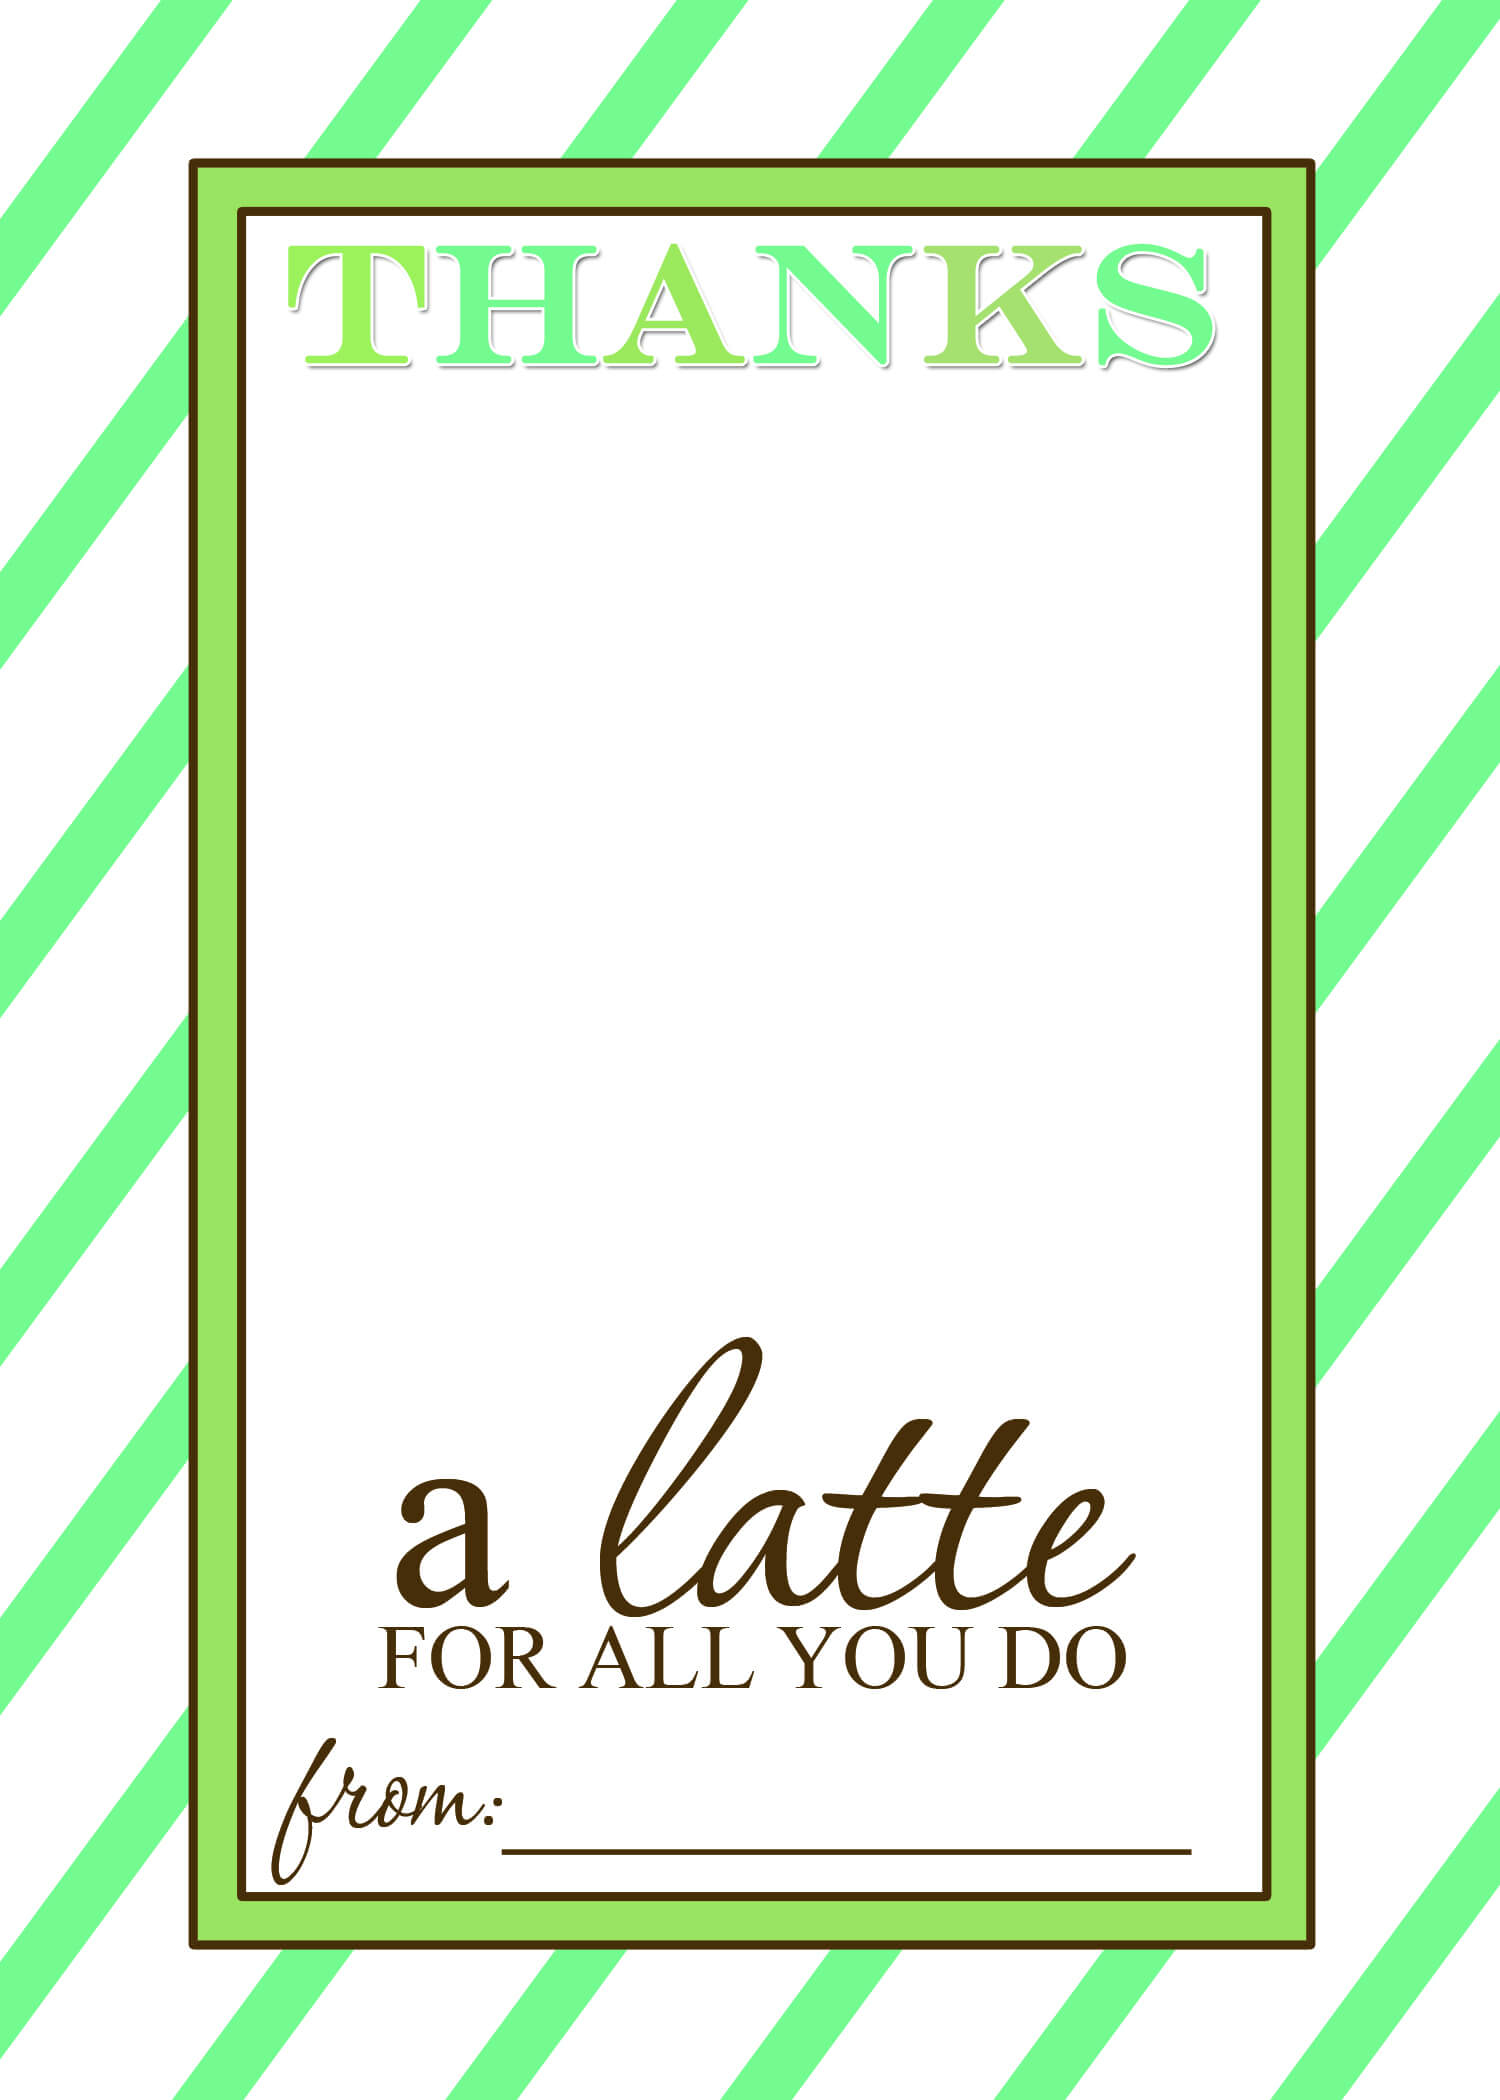 That's Country Living Intended For Thanks A Latte Card Template